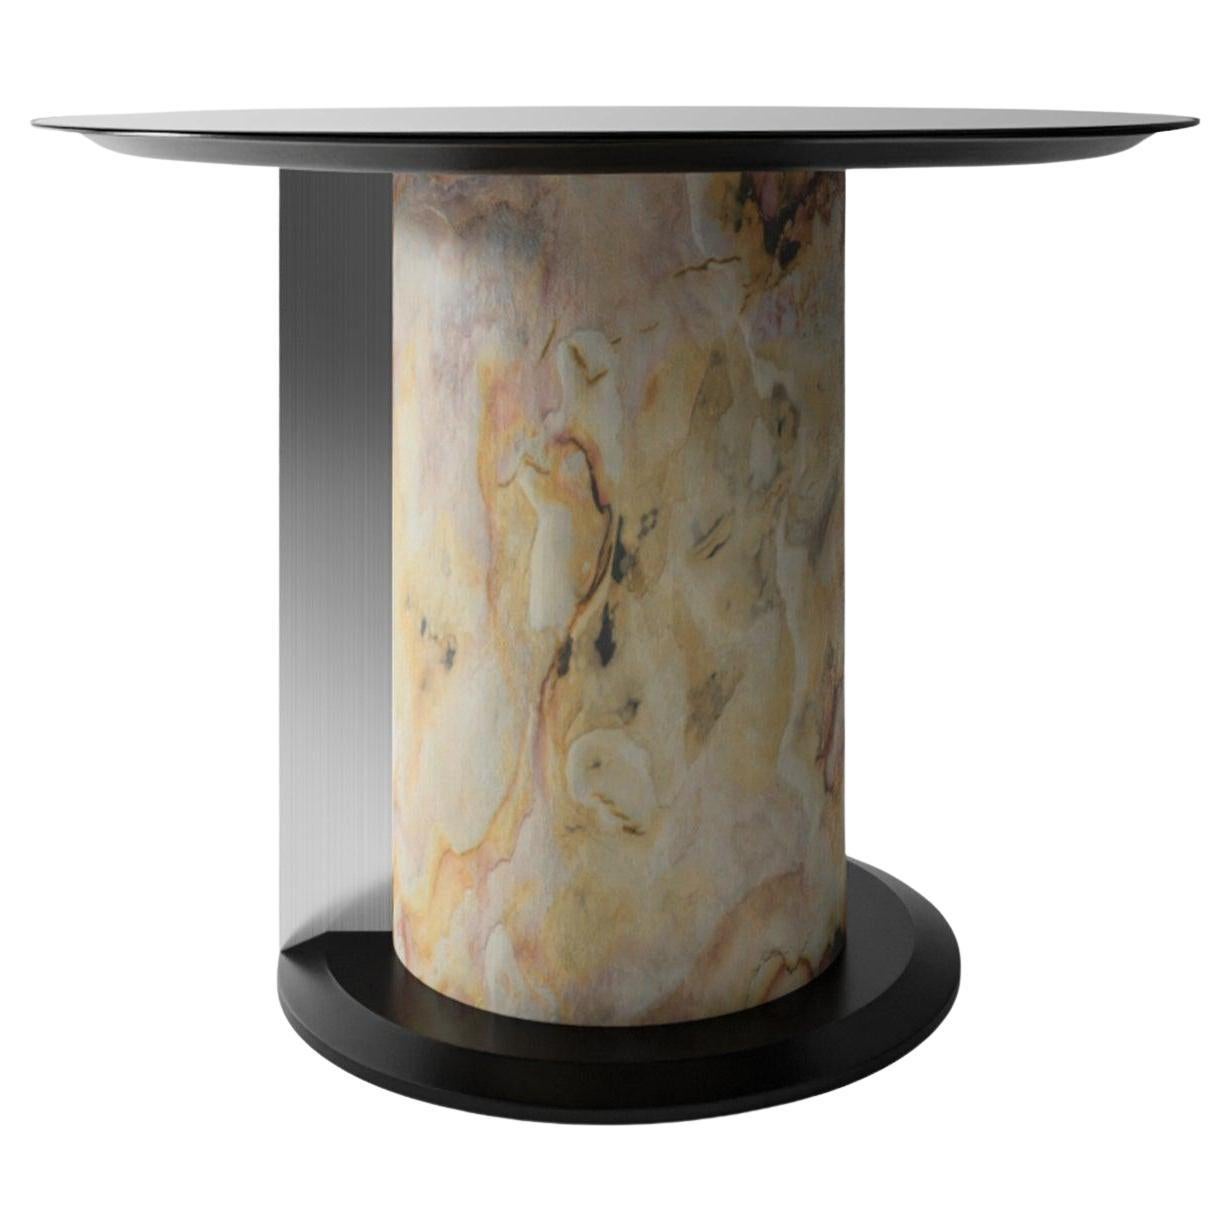 Tim Round Black Glass & Refined Marble Dining Table For Sale